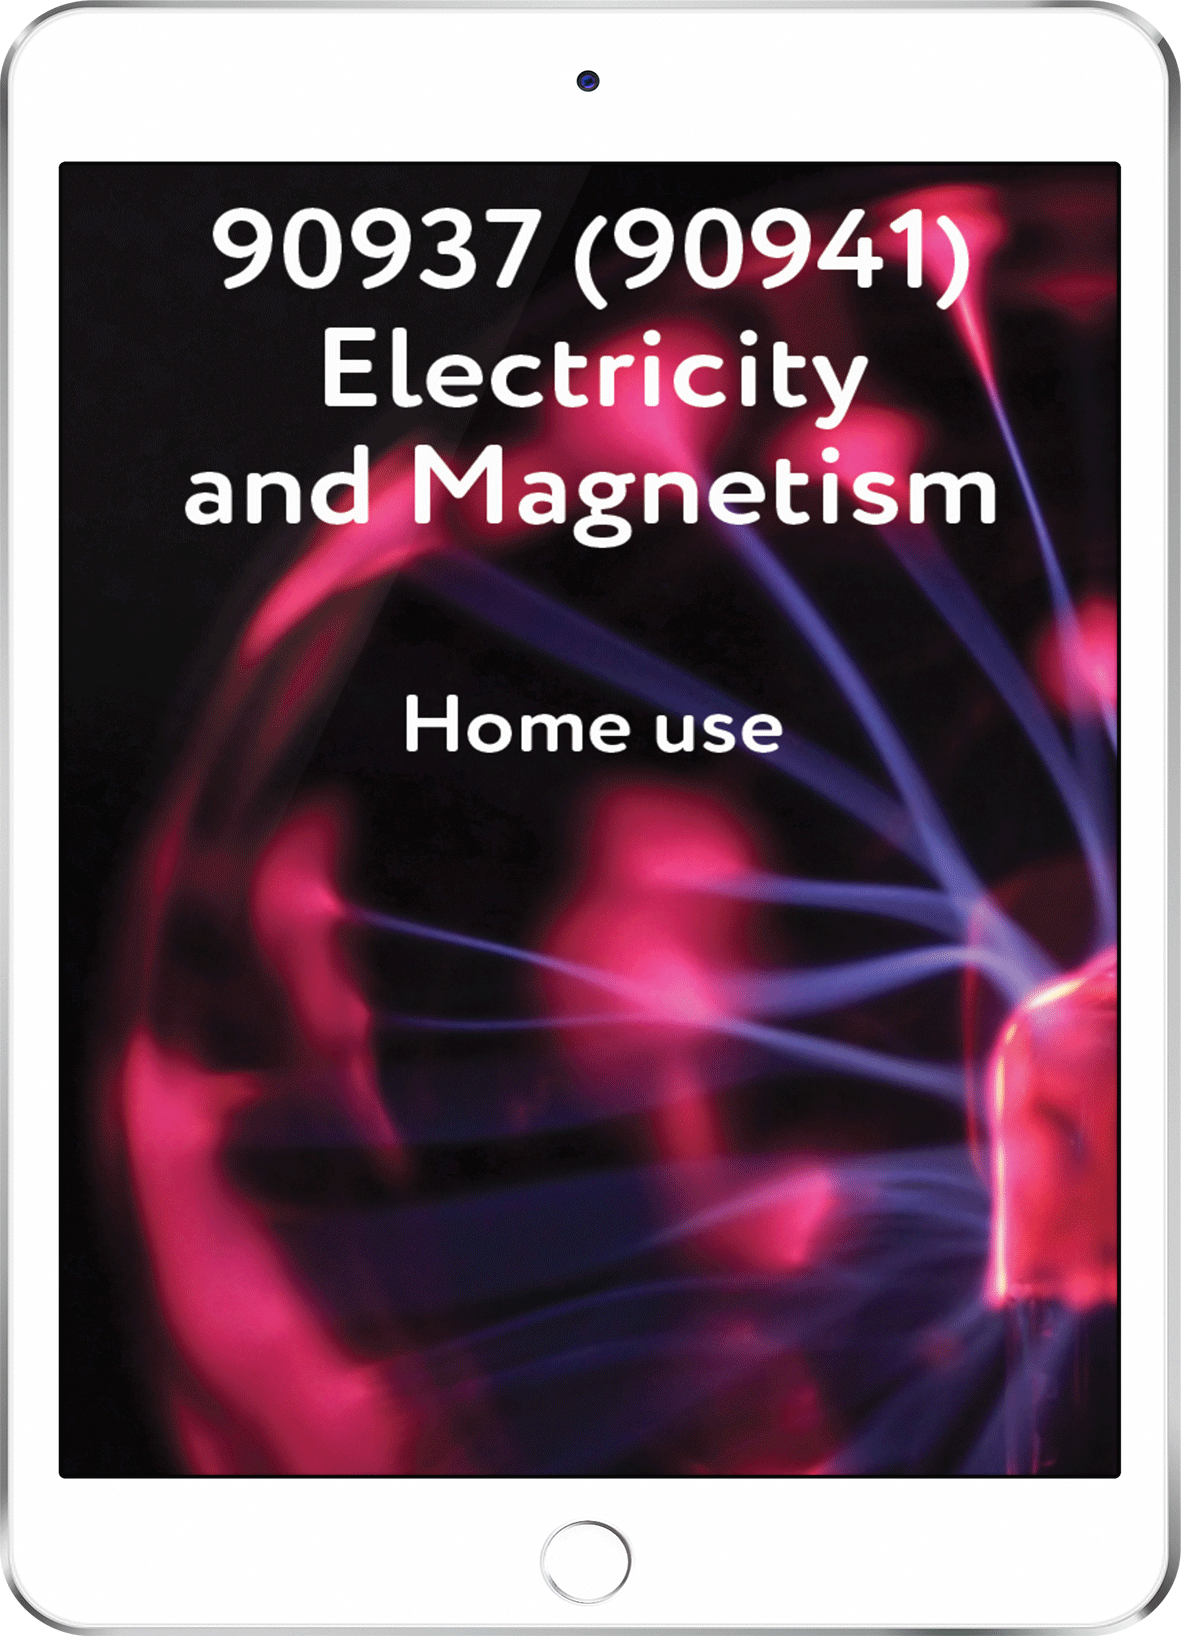 90937 (90941) Electricity and Magnetism - Home Use